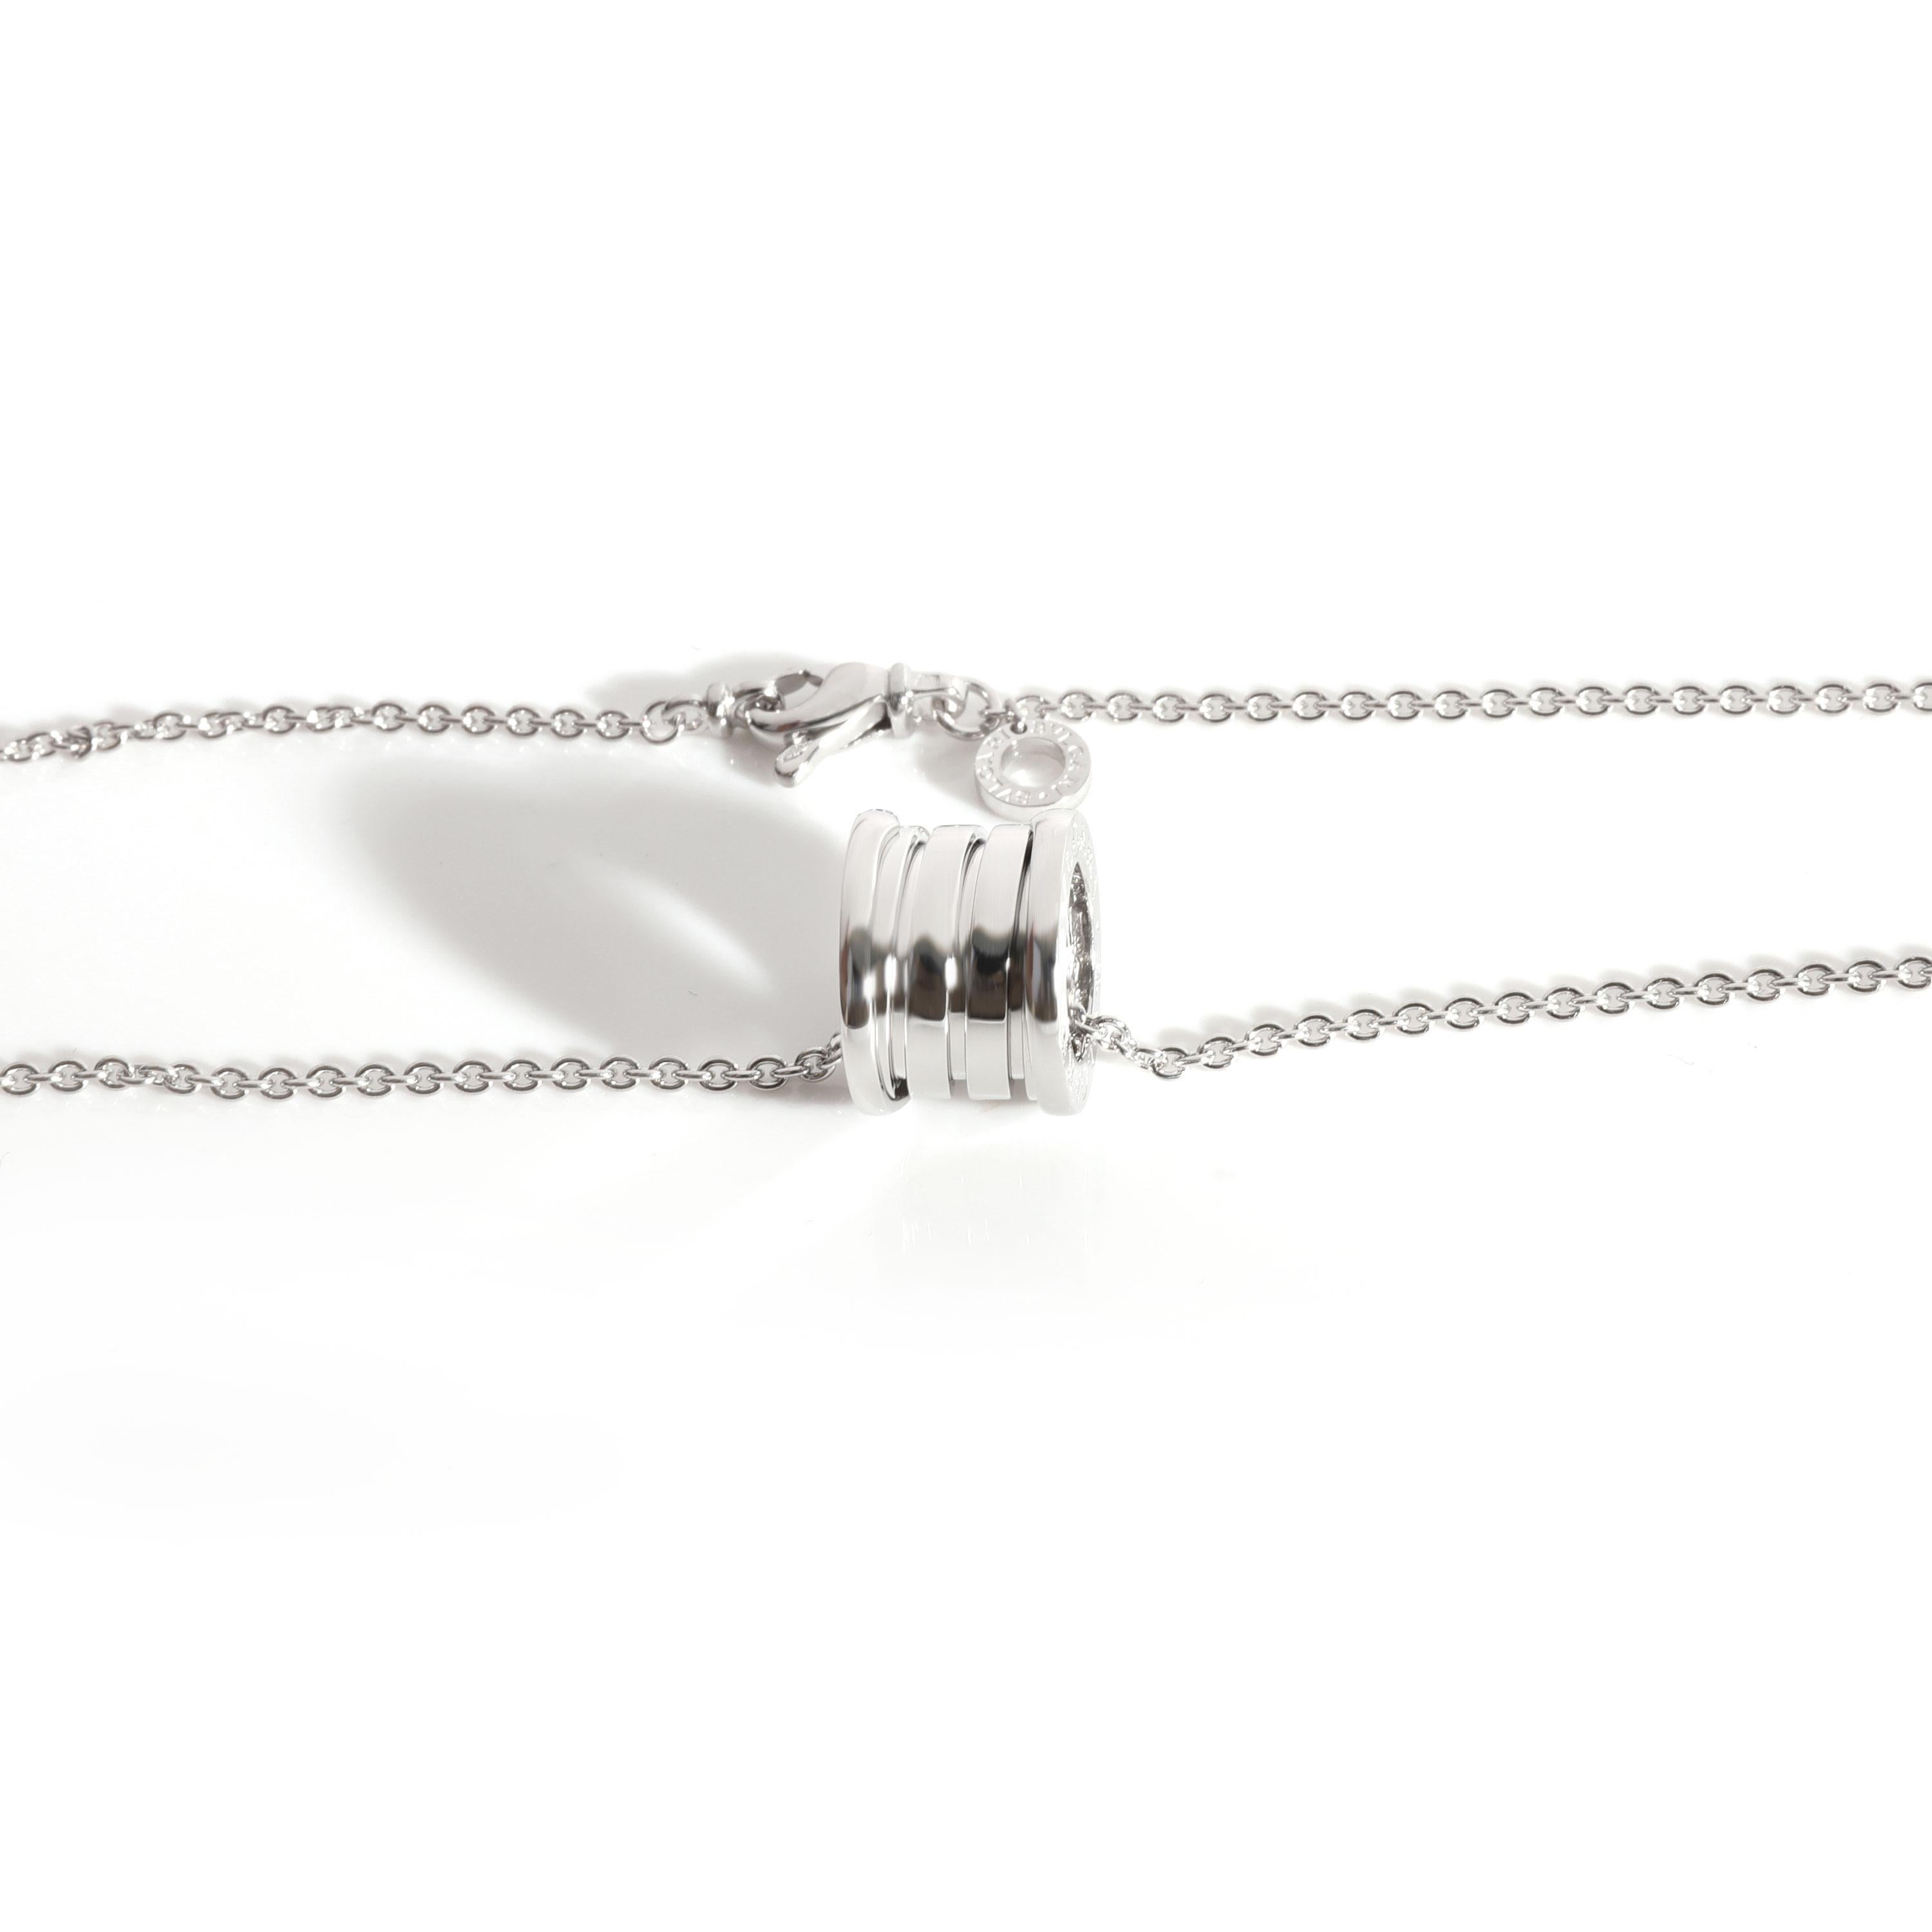 Bulgari B.Zero1 Pendant in 18k White Gold

PRIMARY DETAILS
SKU: 117547
Listing Title: Bulgari B.Zero1 Pendant in 18k White Gold
Condition Description: Retails for 3950 USD. In excellent condition and recently polished. Chain is 16 inches in